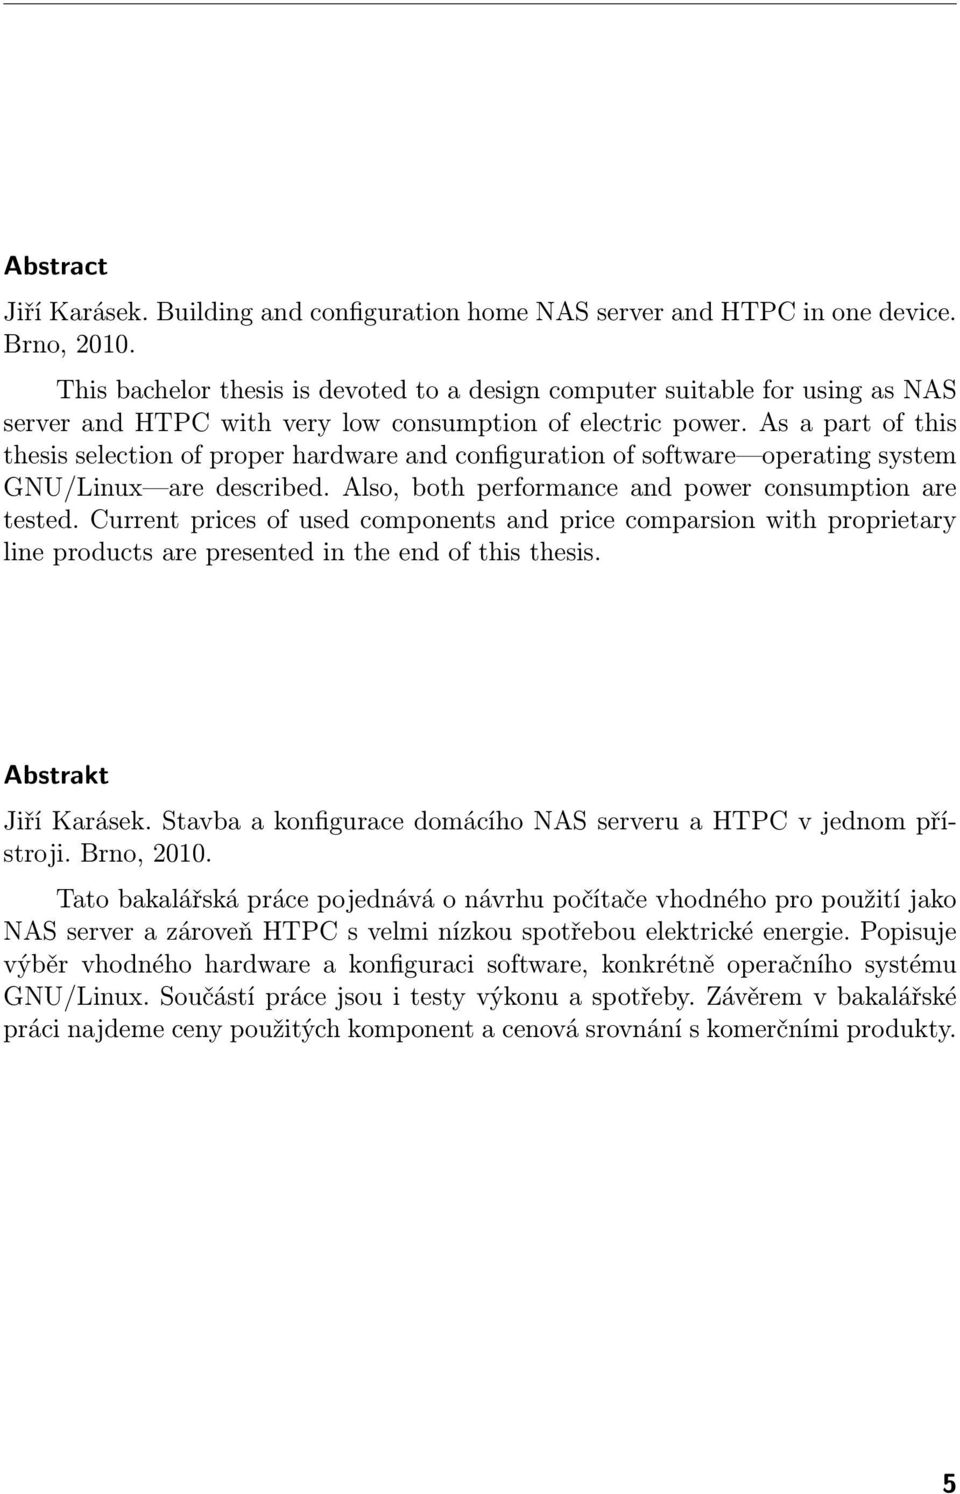 As a part of this thesis selection of proper hardware and configuration of software operating system GNU/Linux are described. Also, both performance and power consumption are tested.